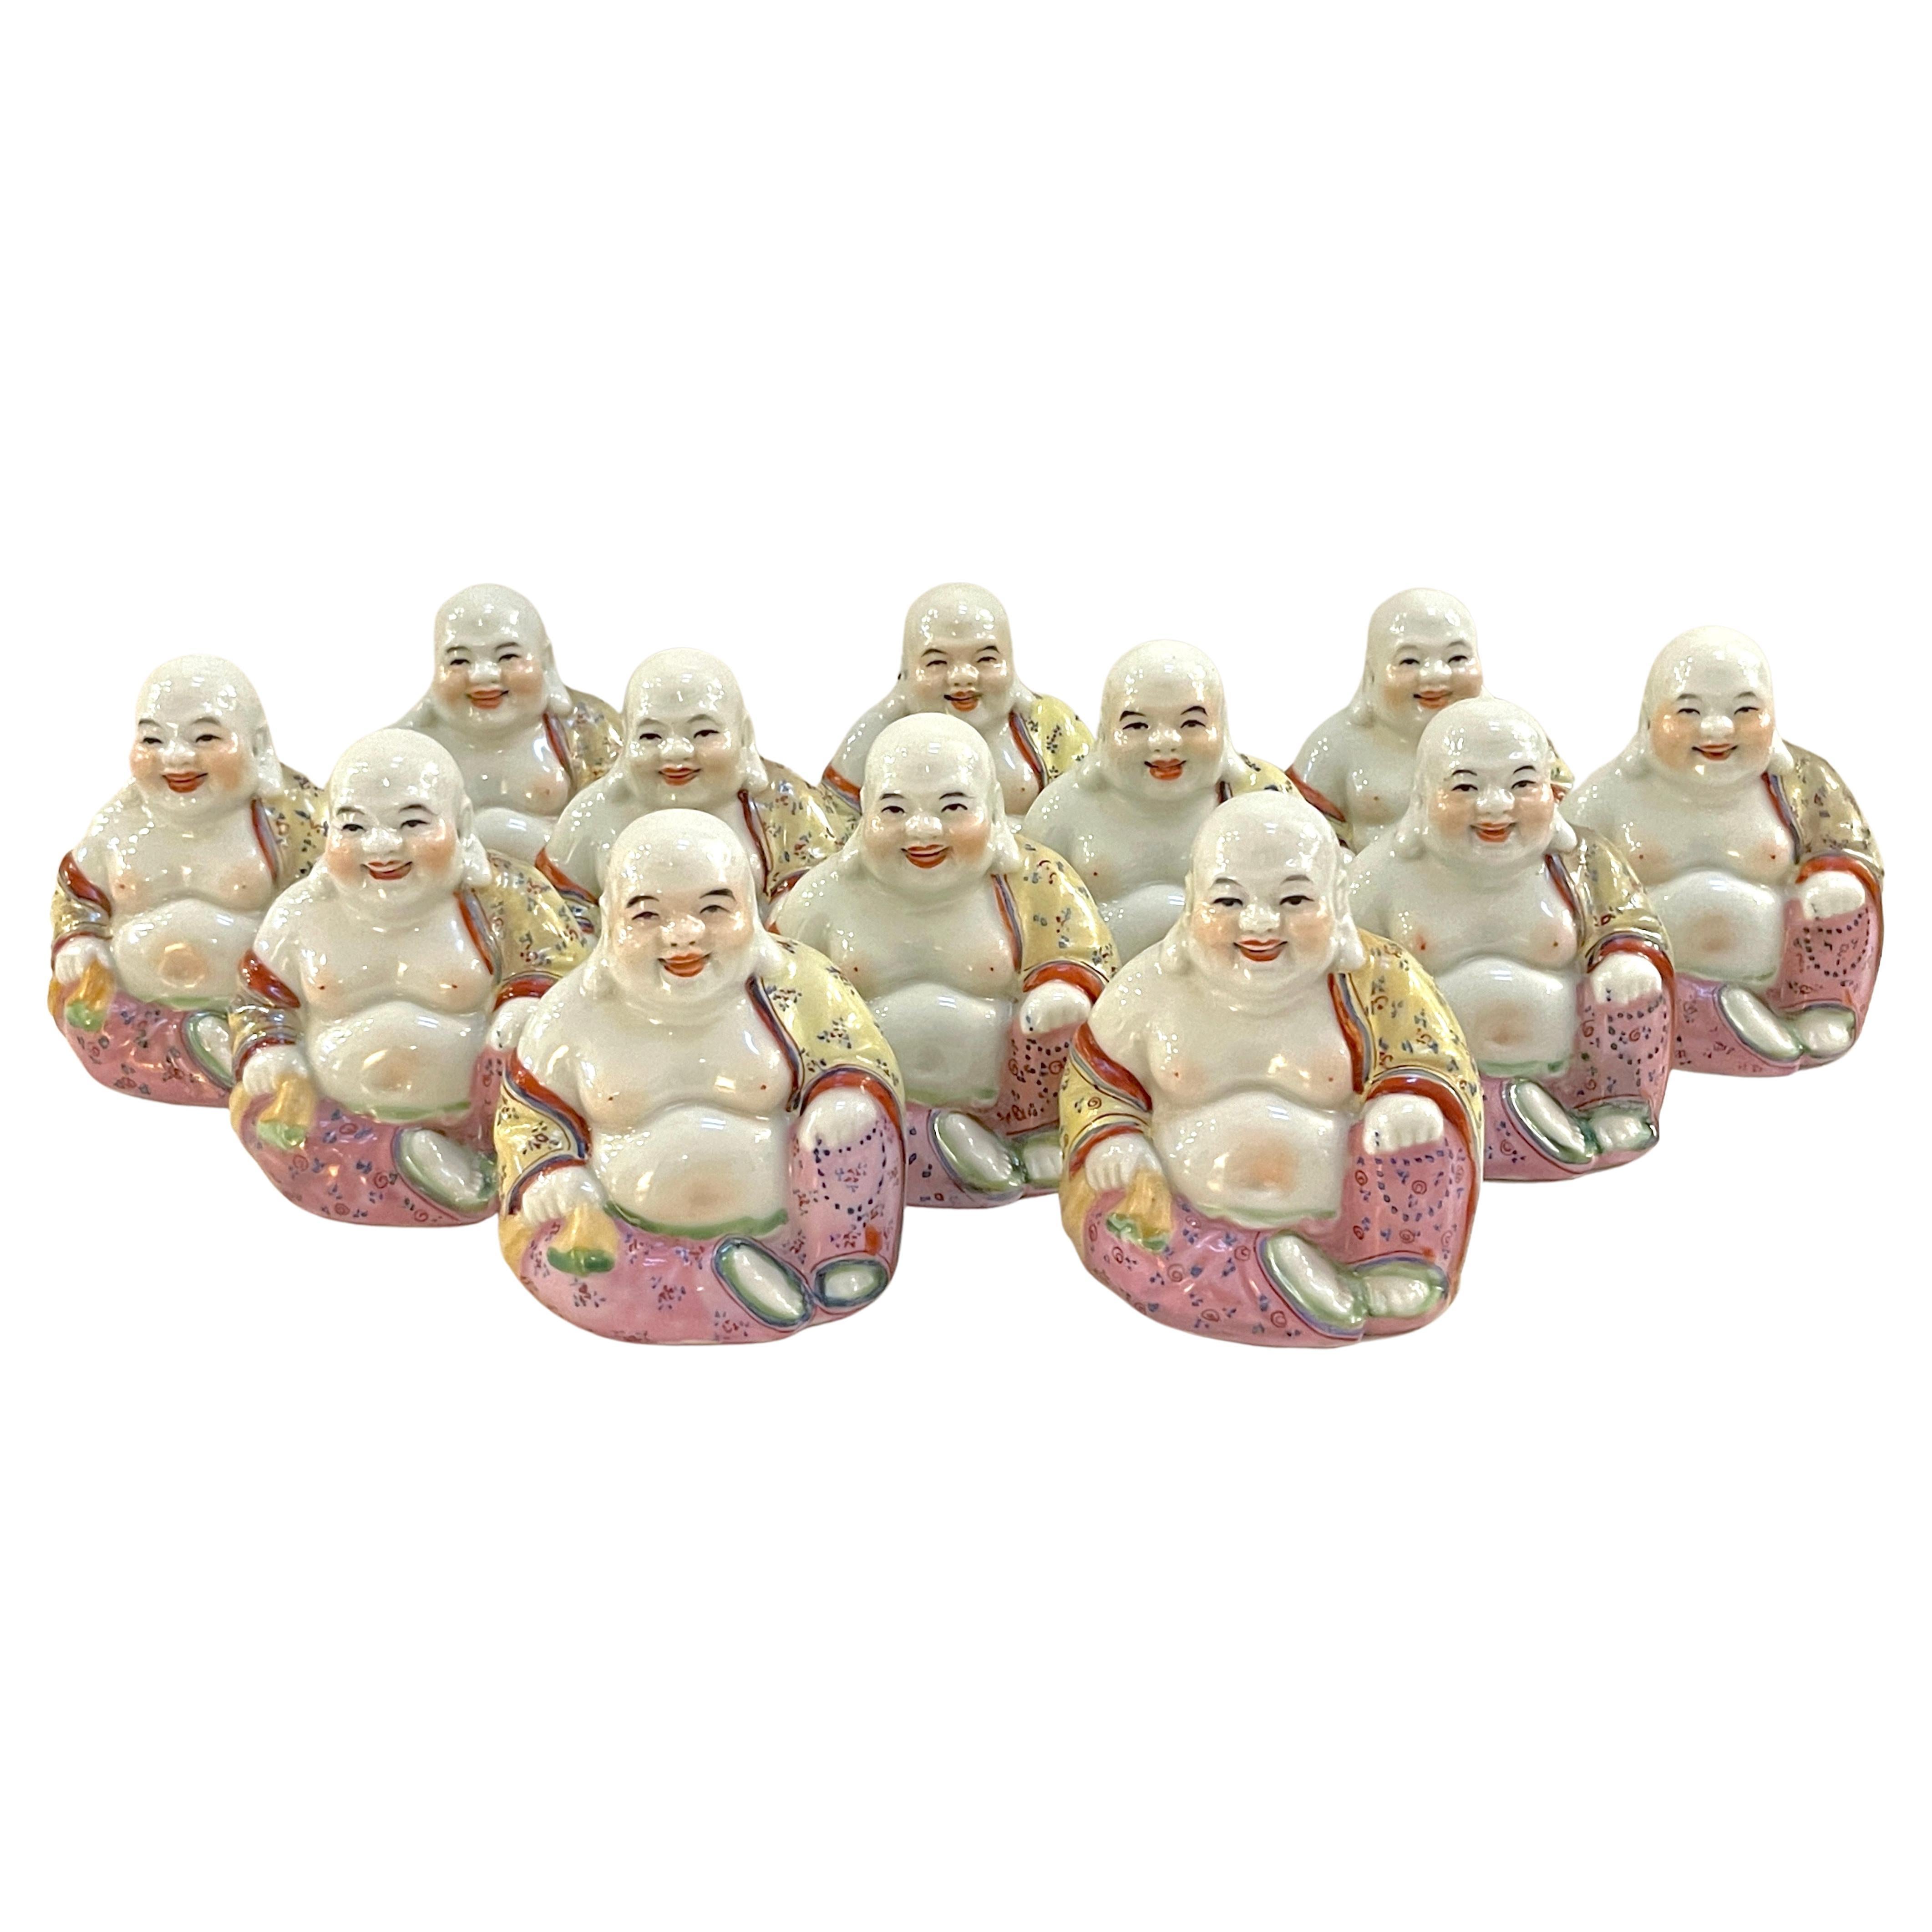 Collection of 12 Chinese Export Famille-Verte Porcelain Diminutive Buddhas